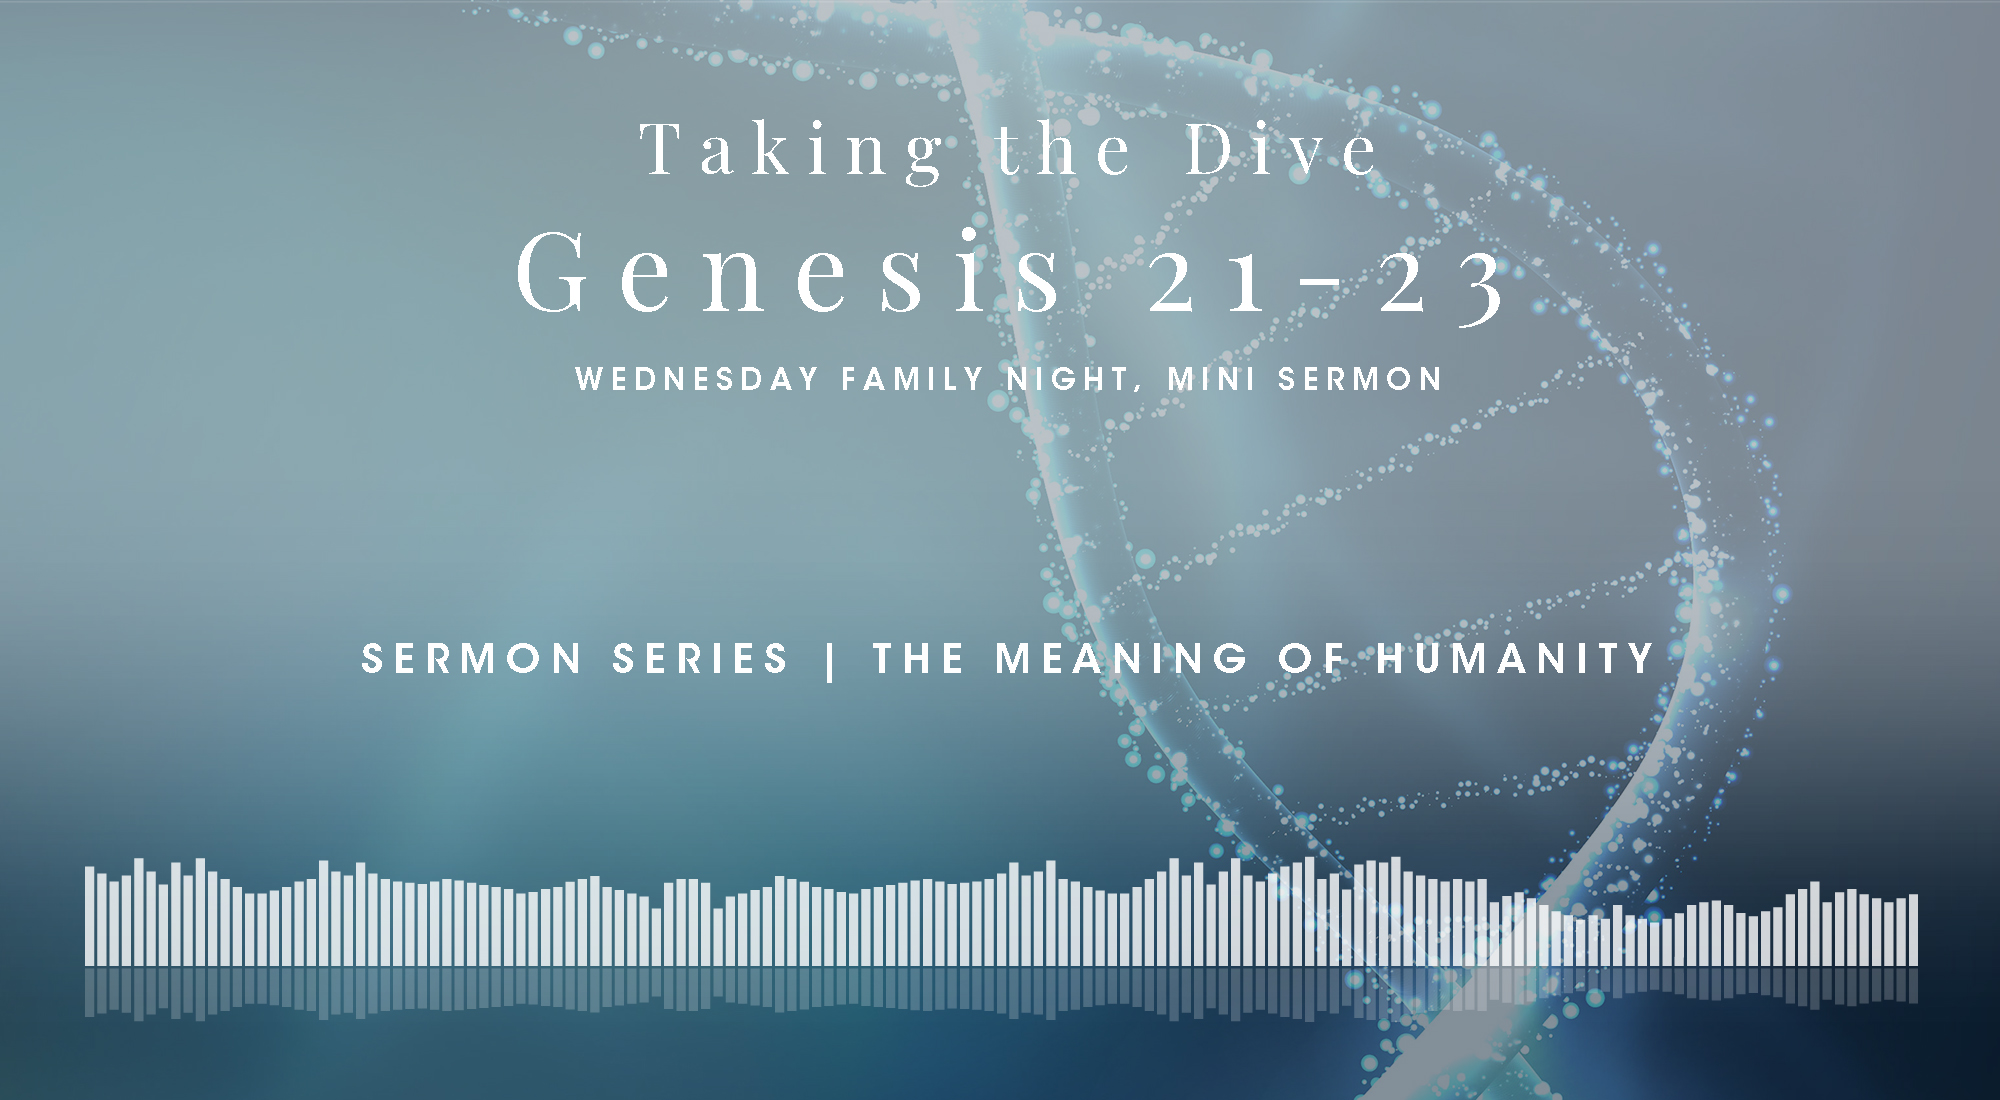 A Mini Bible Study in Genesis 21-23, From The Meaning of Humanity Sermon Series, Wyandotte County Christian Church Wednesday Family Night